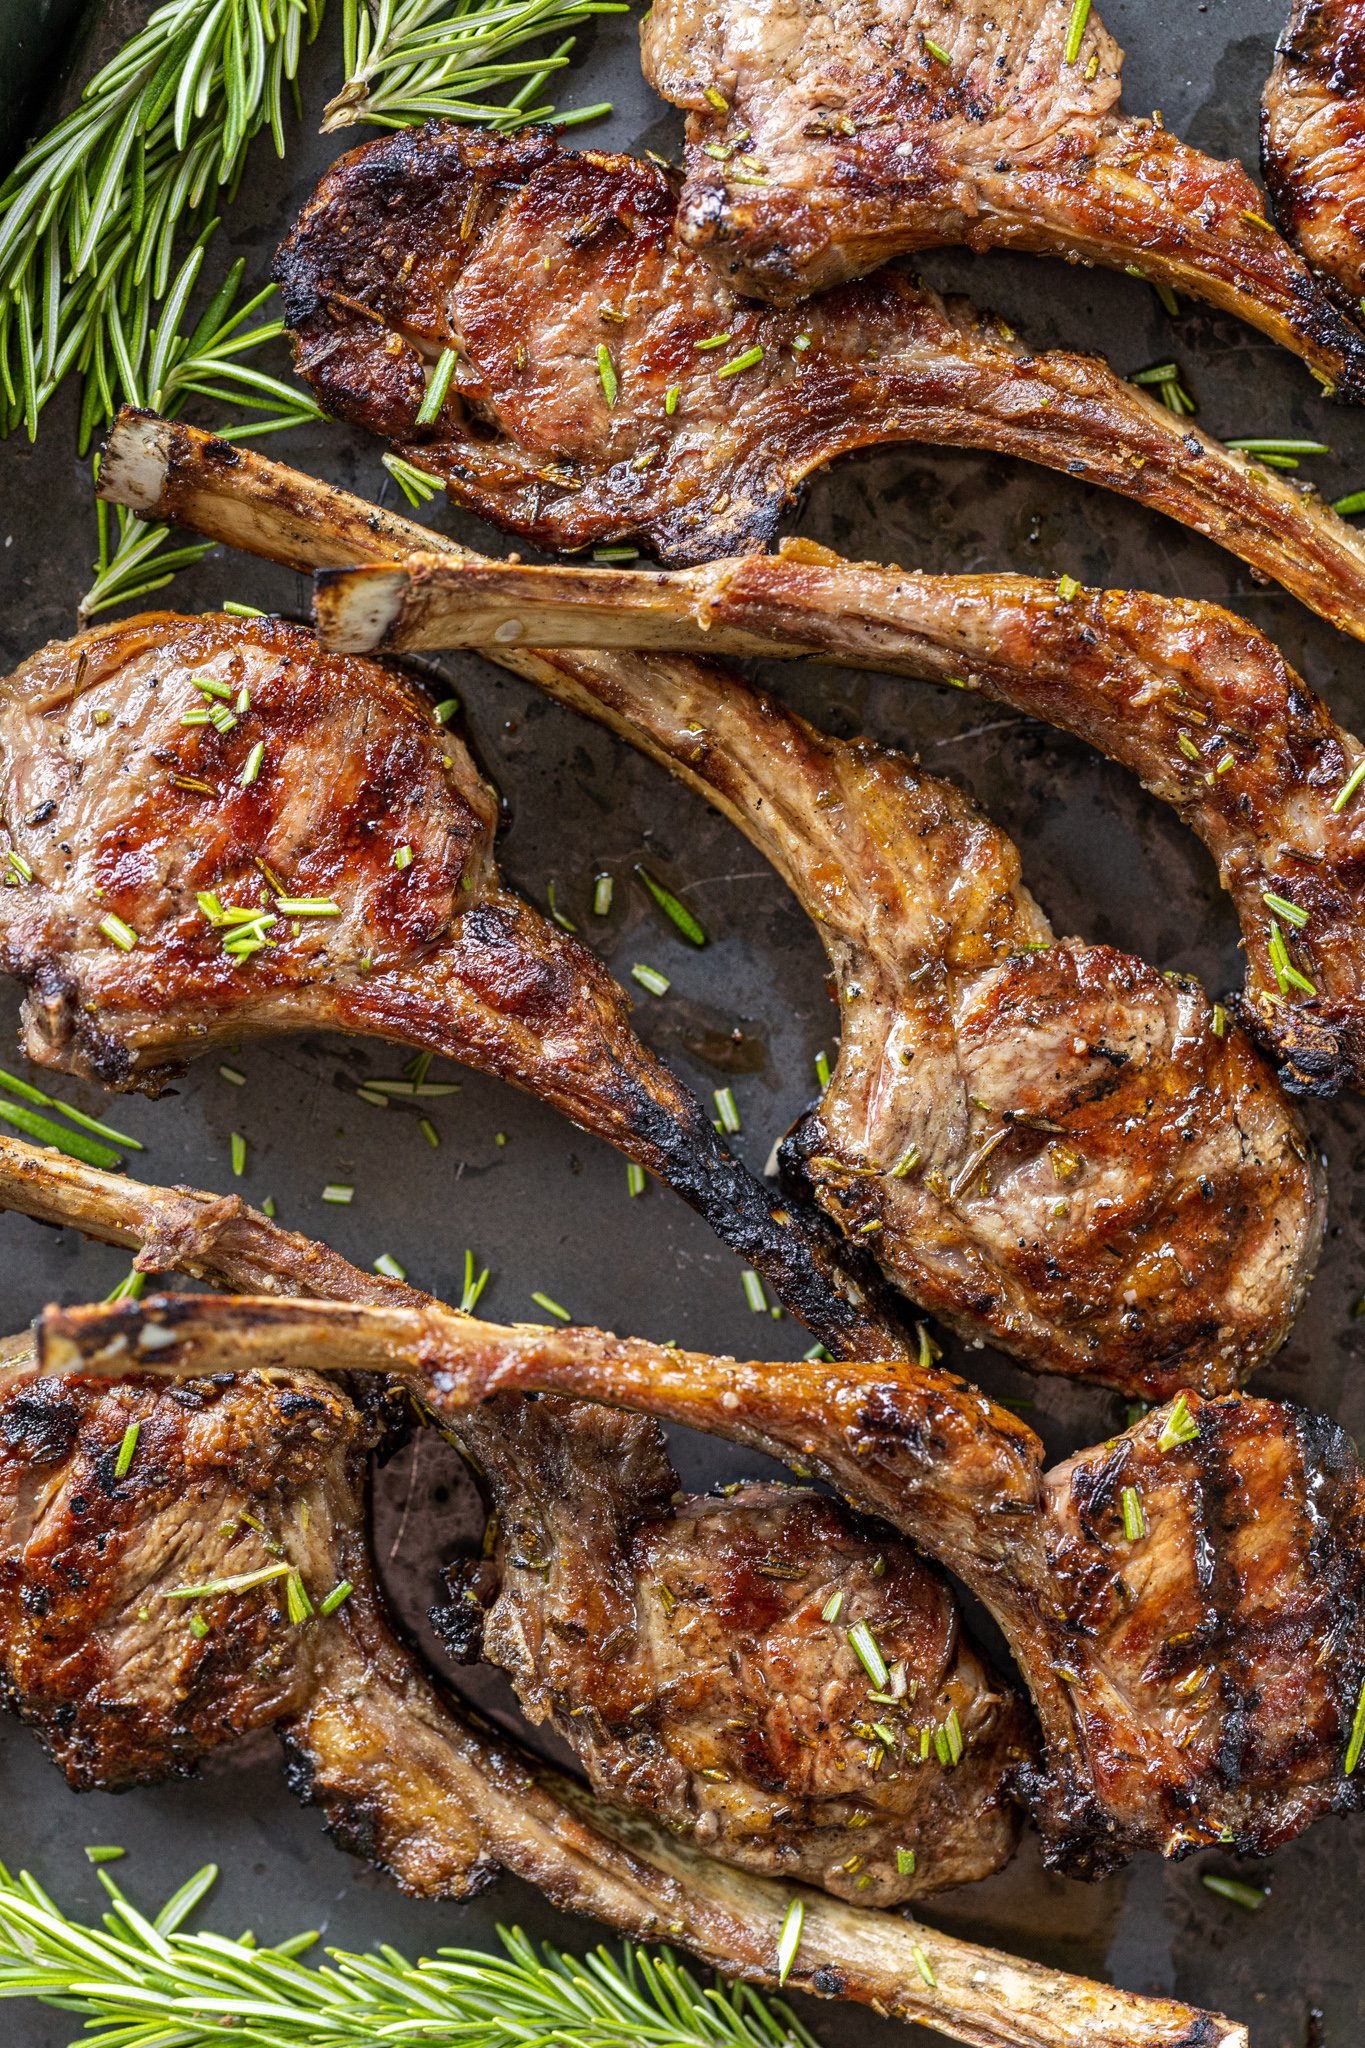 Best Grilled Lamb Chops Recipe - How to Make Grilled Lamb Chops